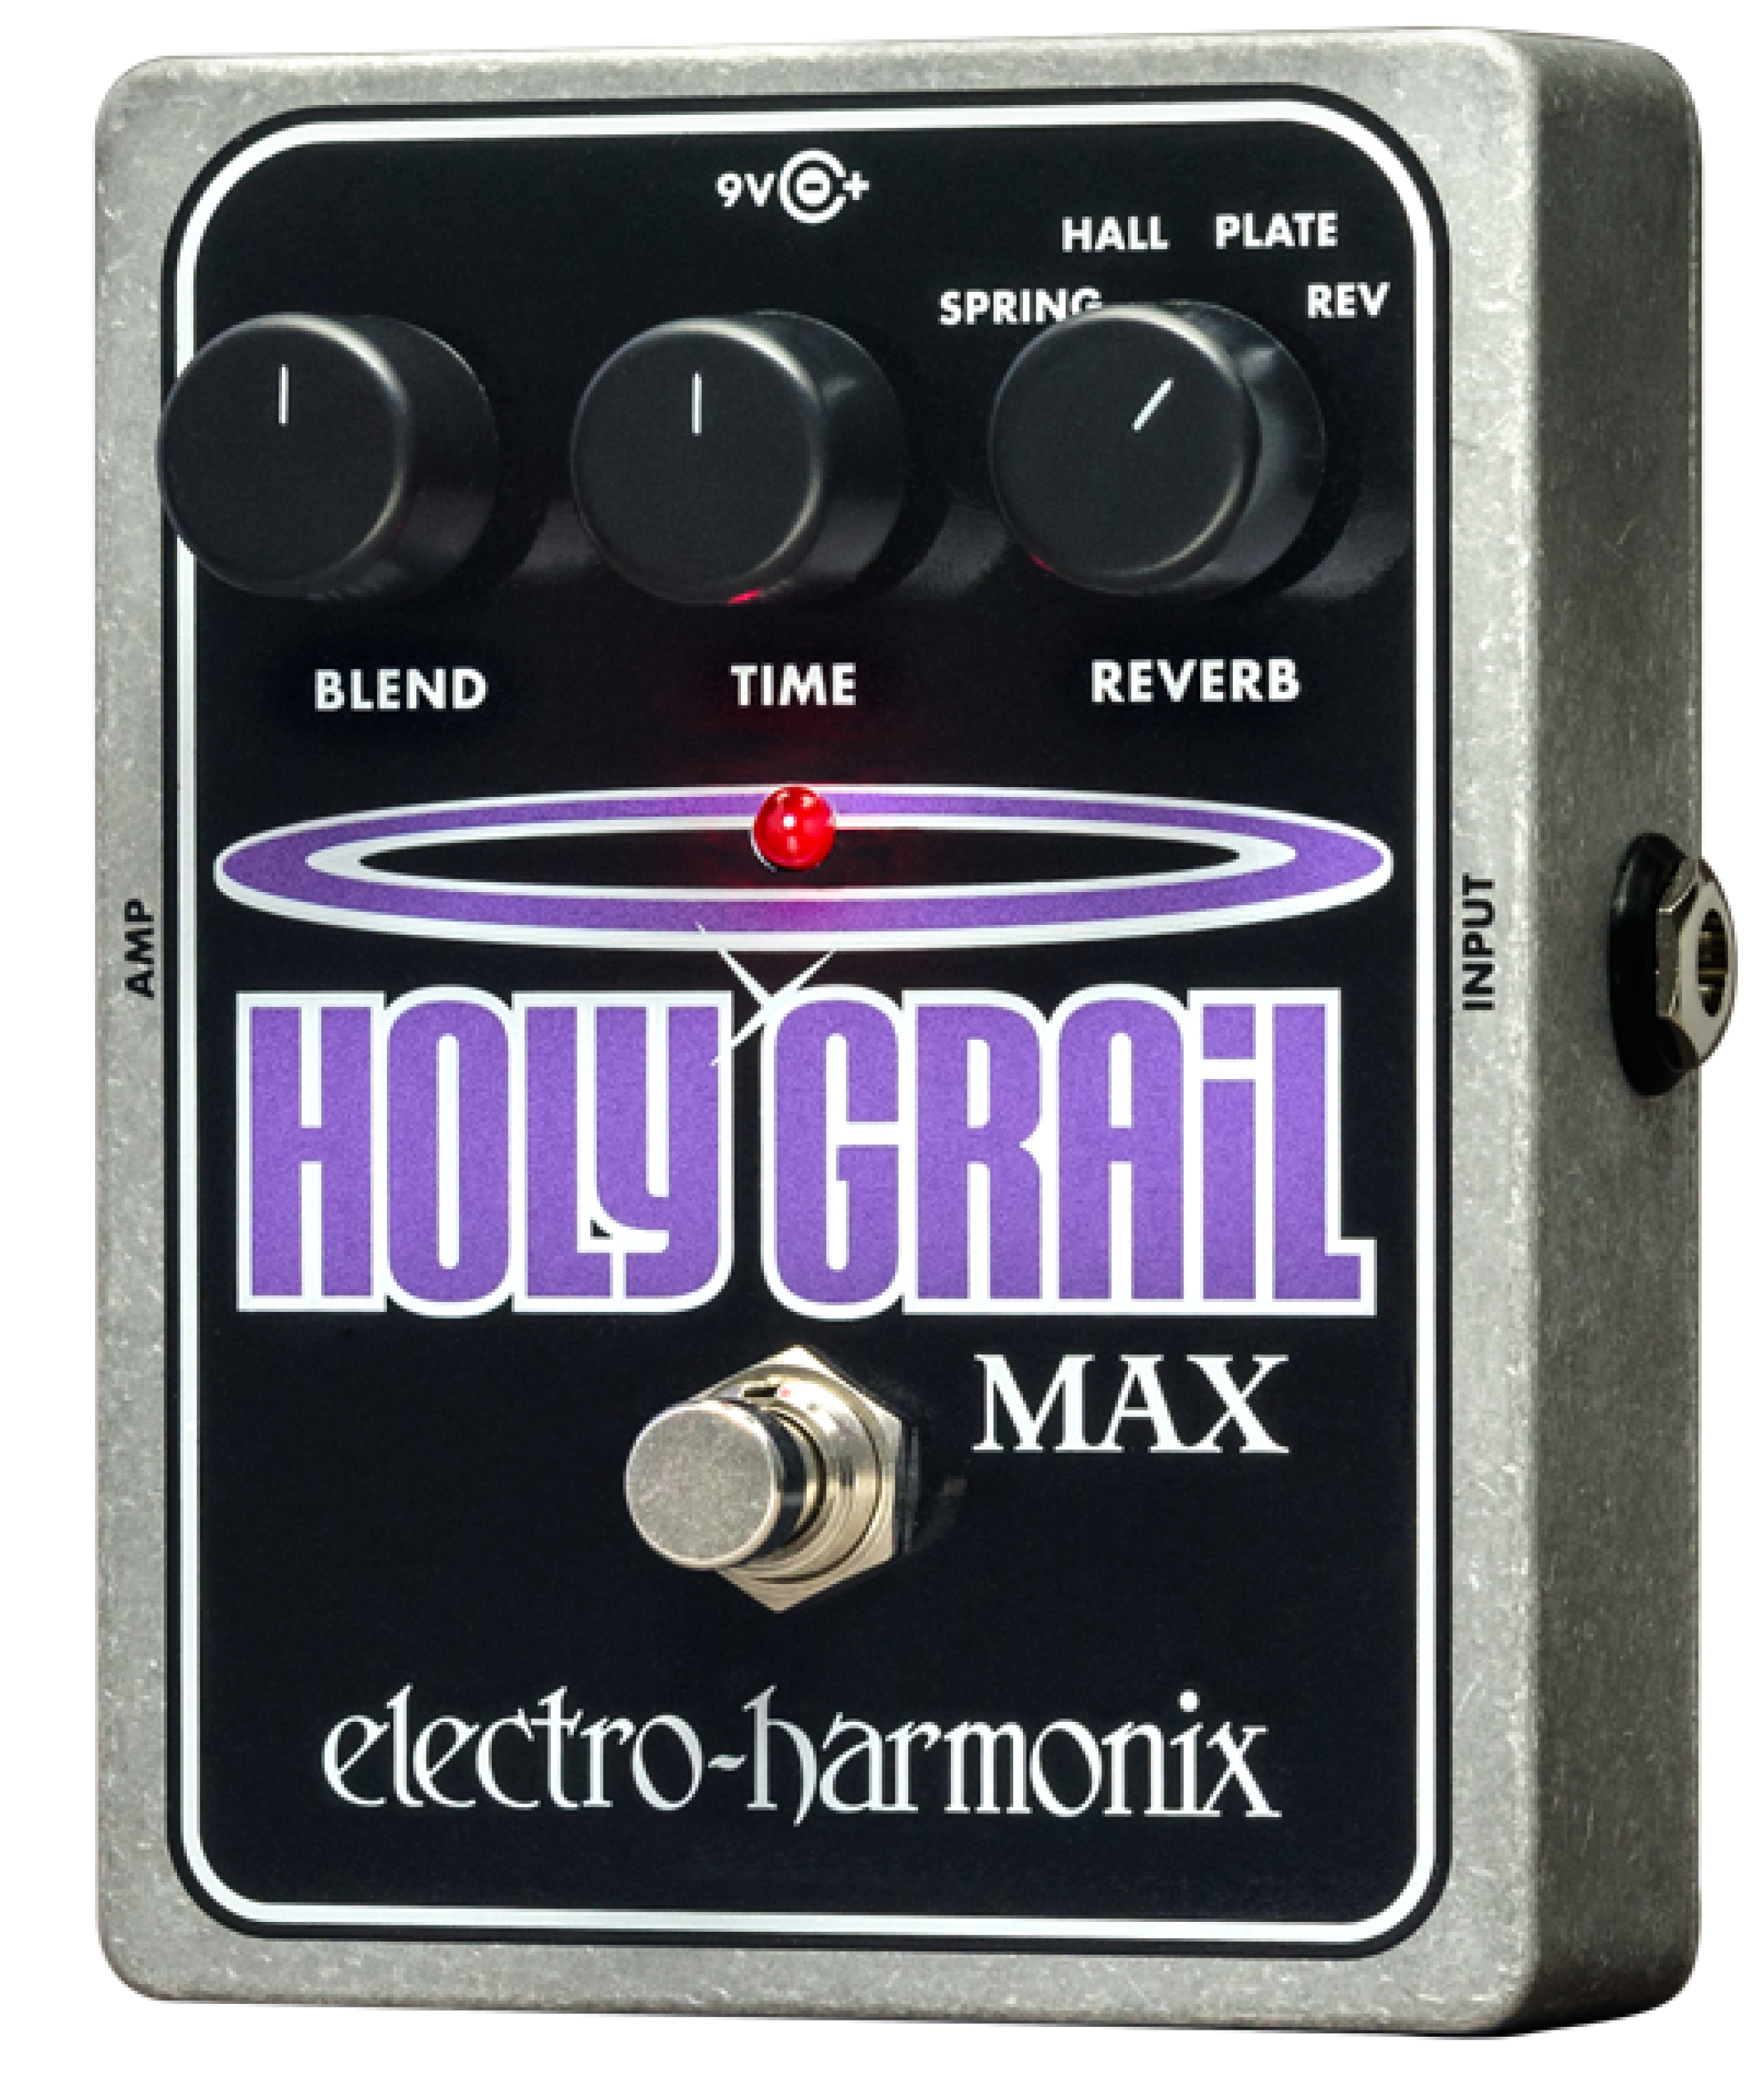 Electro-Harmonix Holy Grail Max Reverb Pedal | Sweetwater